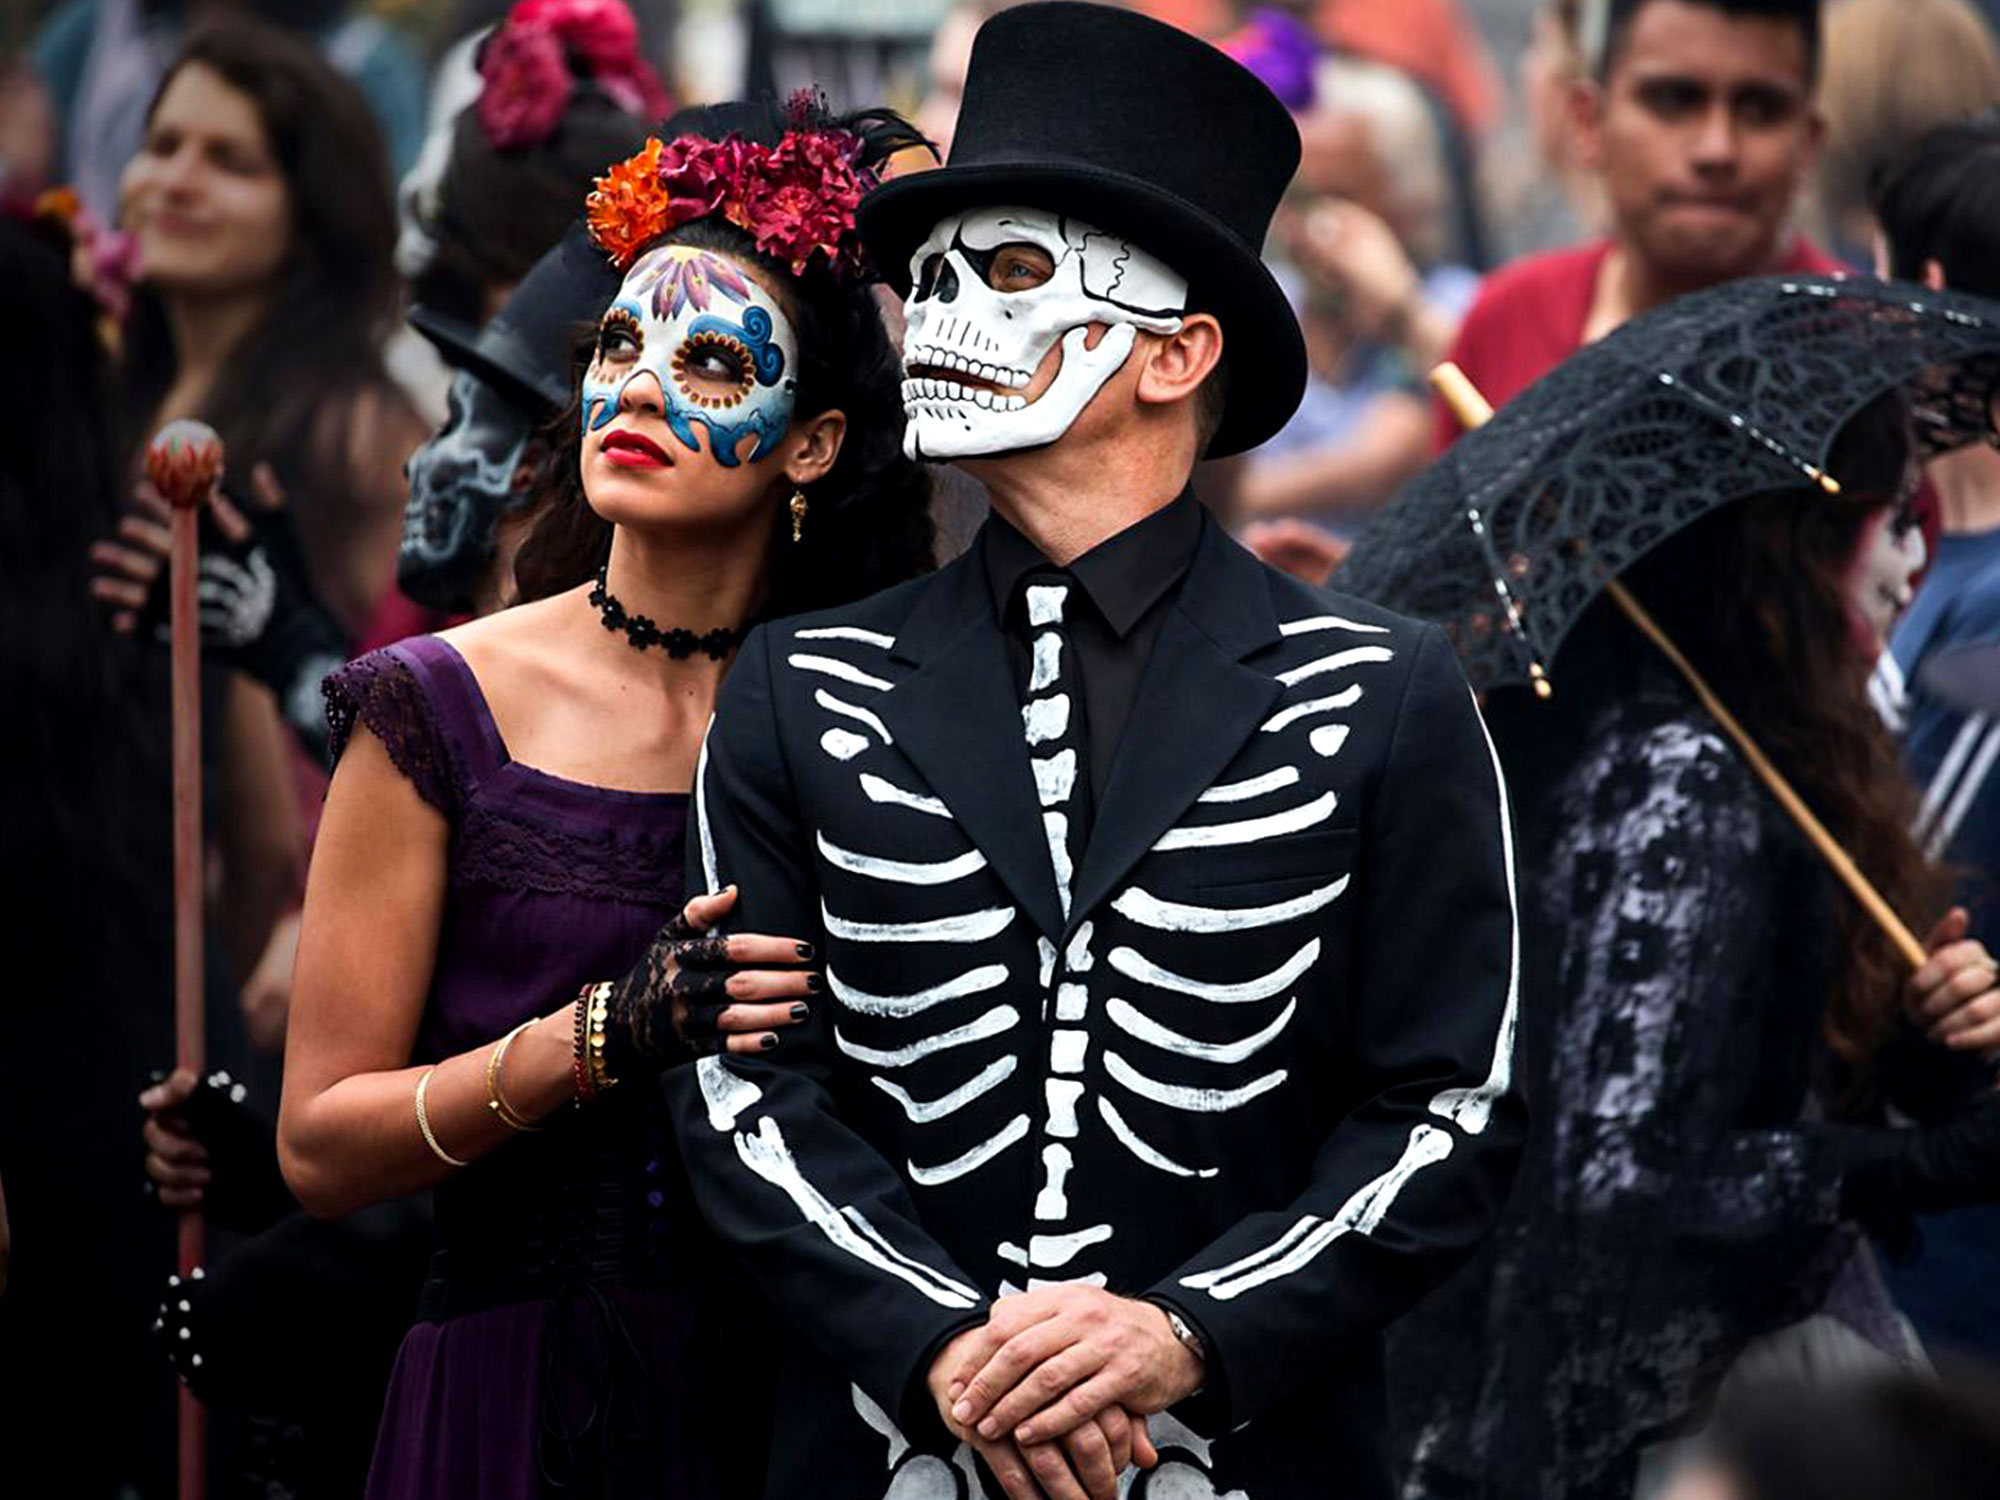 007 delivers Day of the Dead parade to Mexico with mixed results2000 x 1500